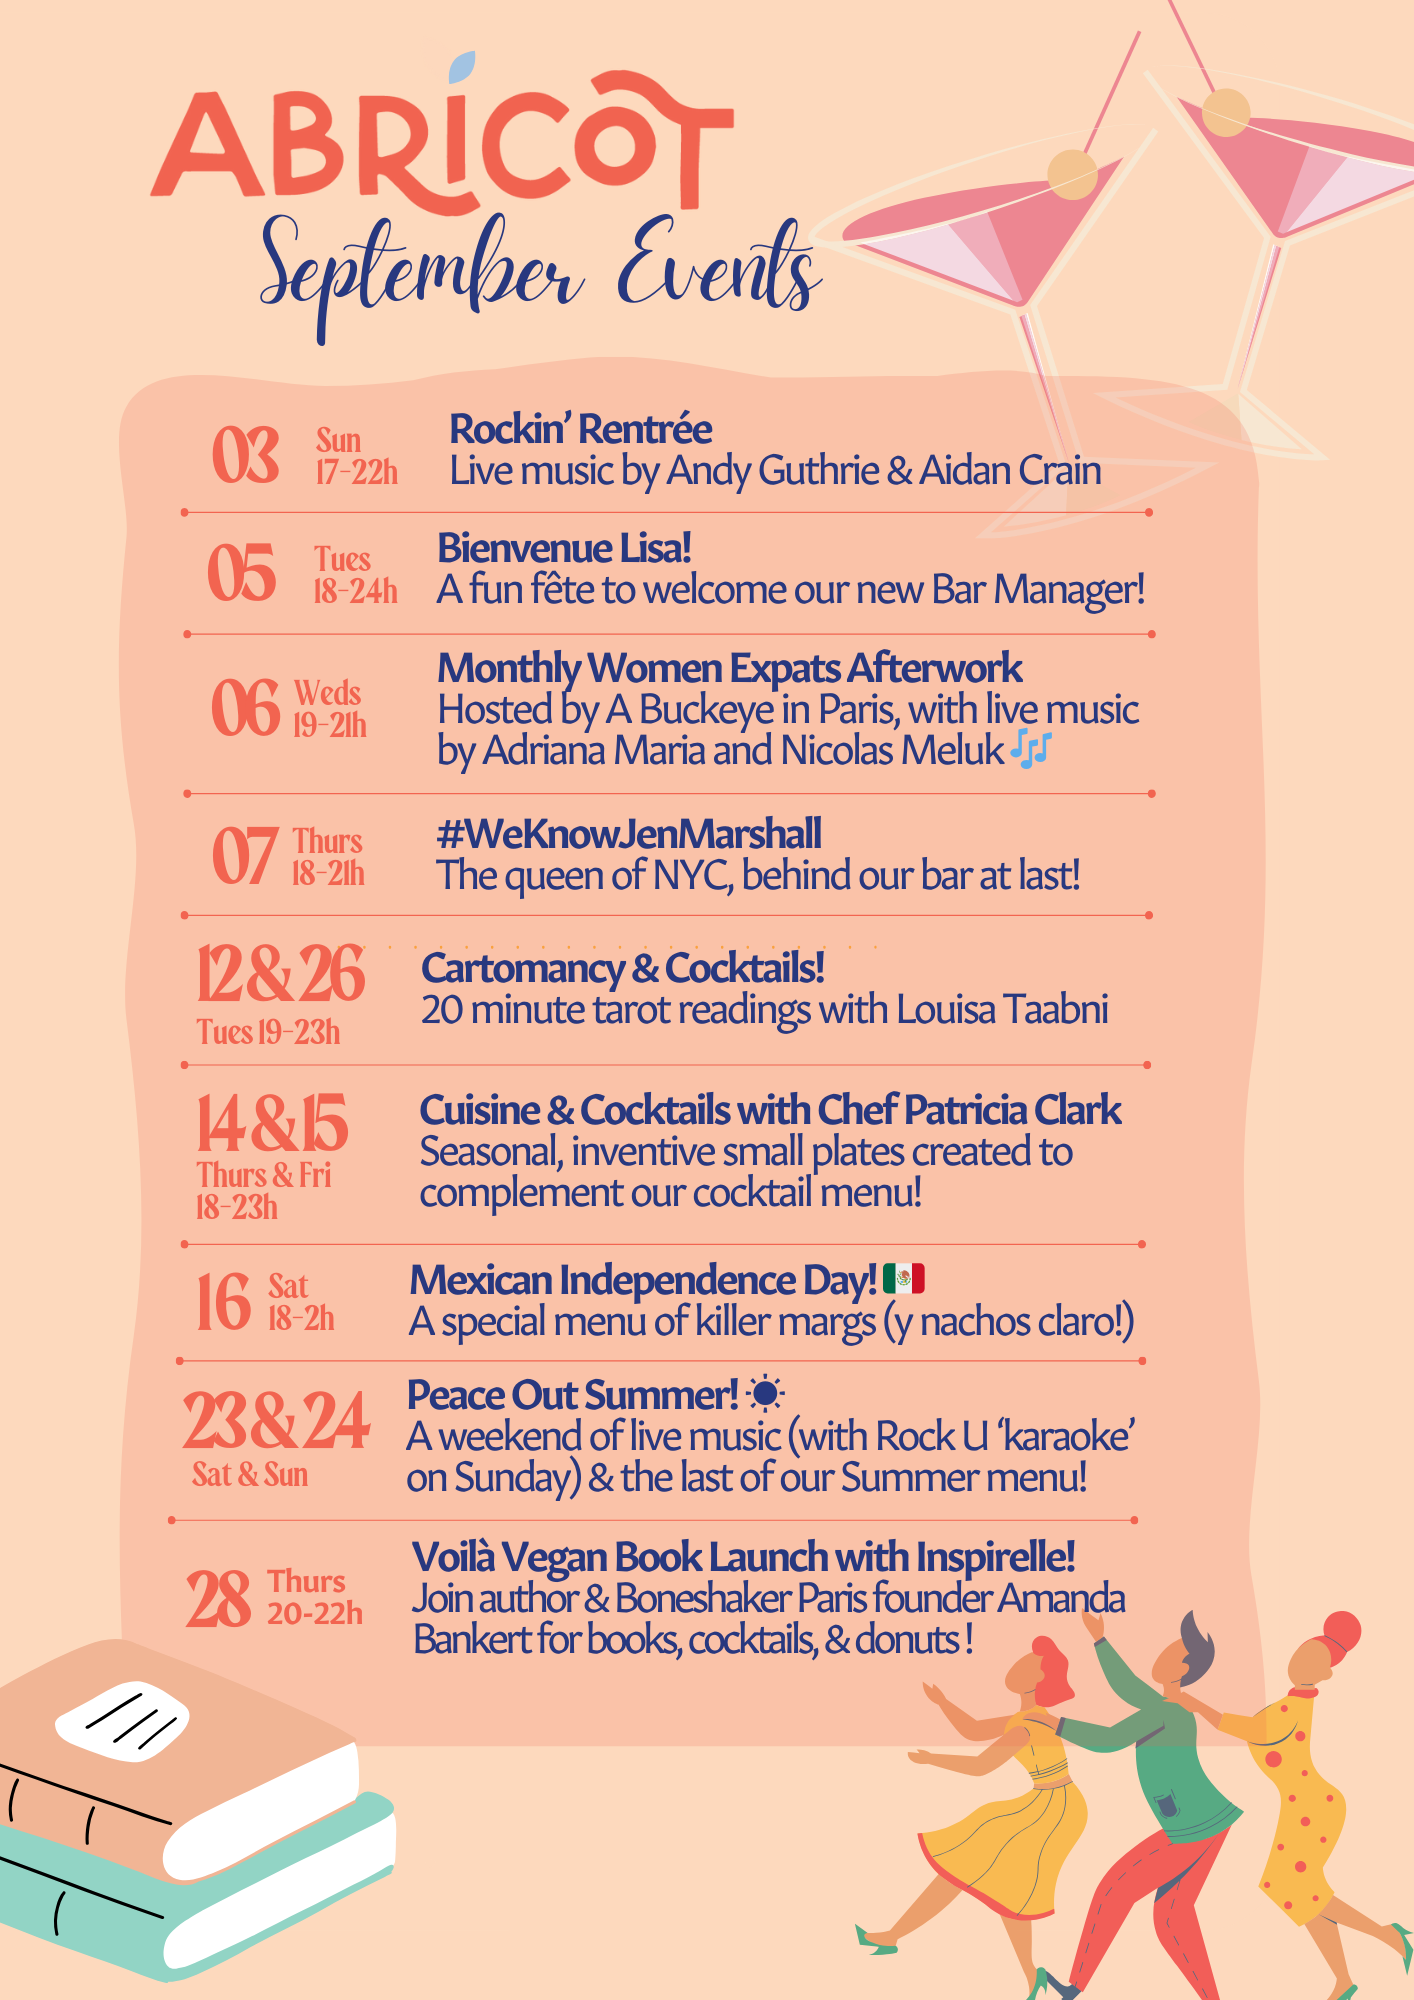 September Events at Abricot!